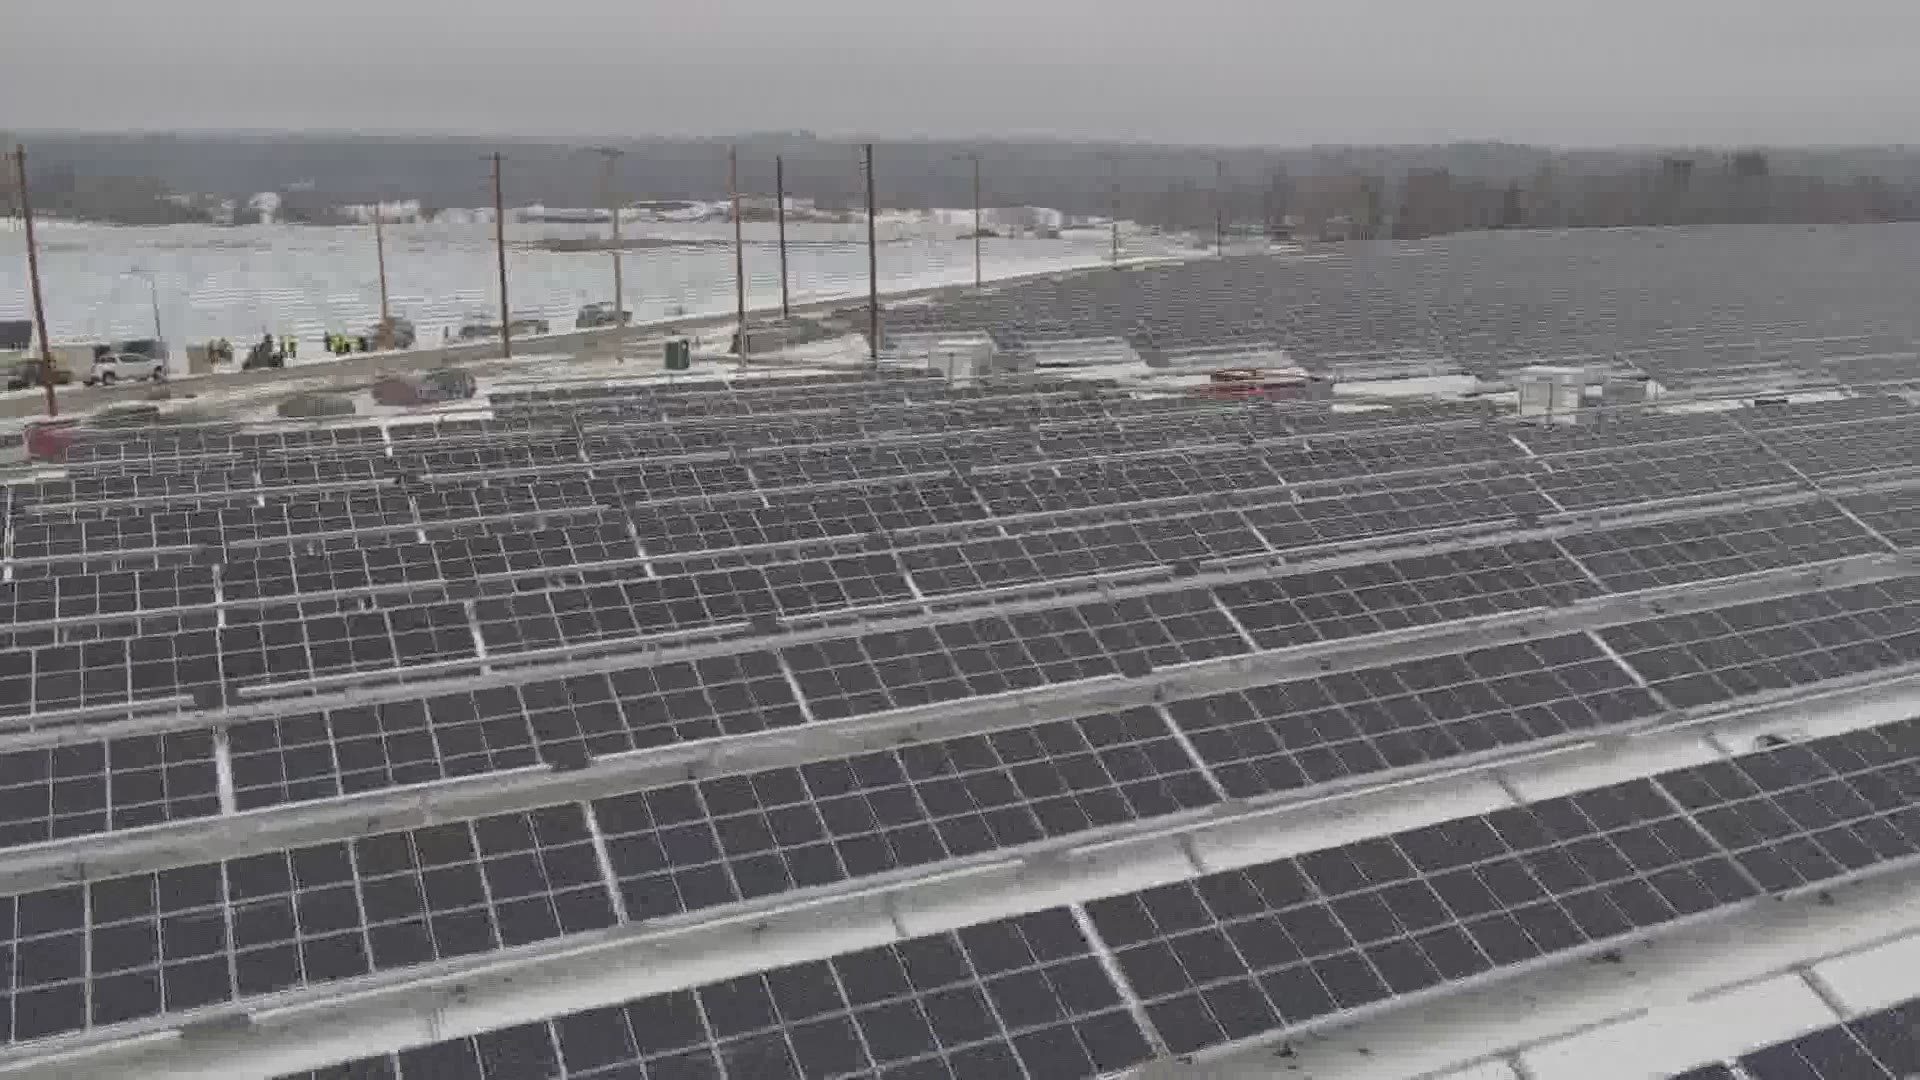 Dirigo Solar's 67-thousand solar panel project is nearly complete and will generate power to almost 10 thousand homes.